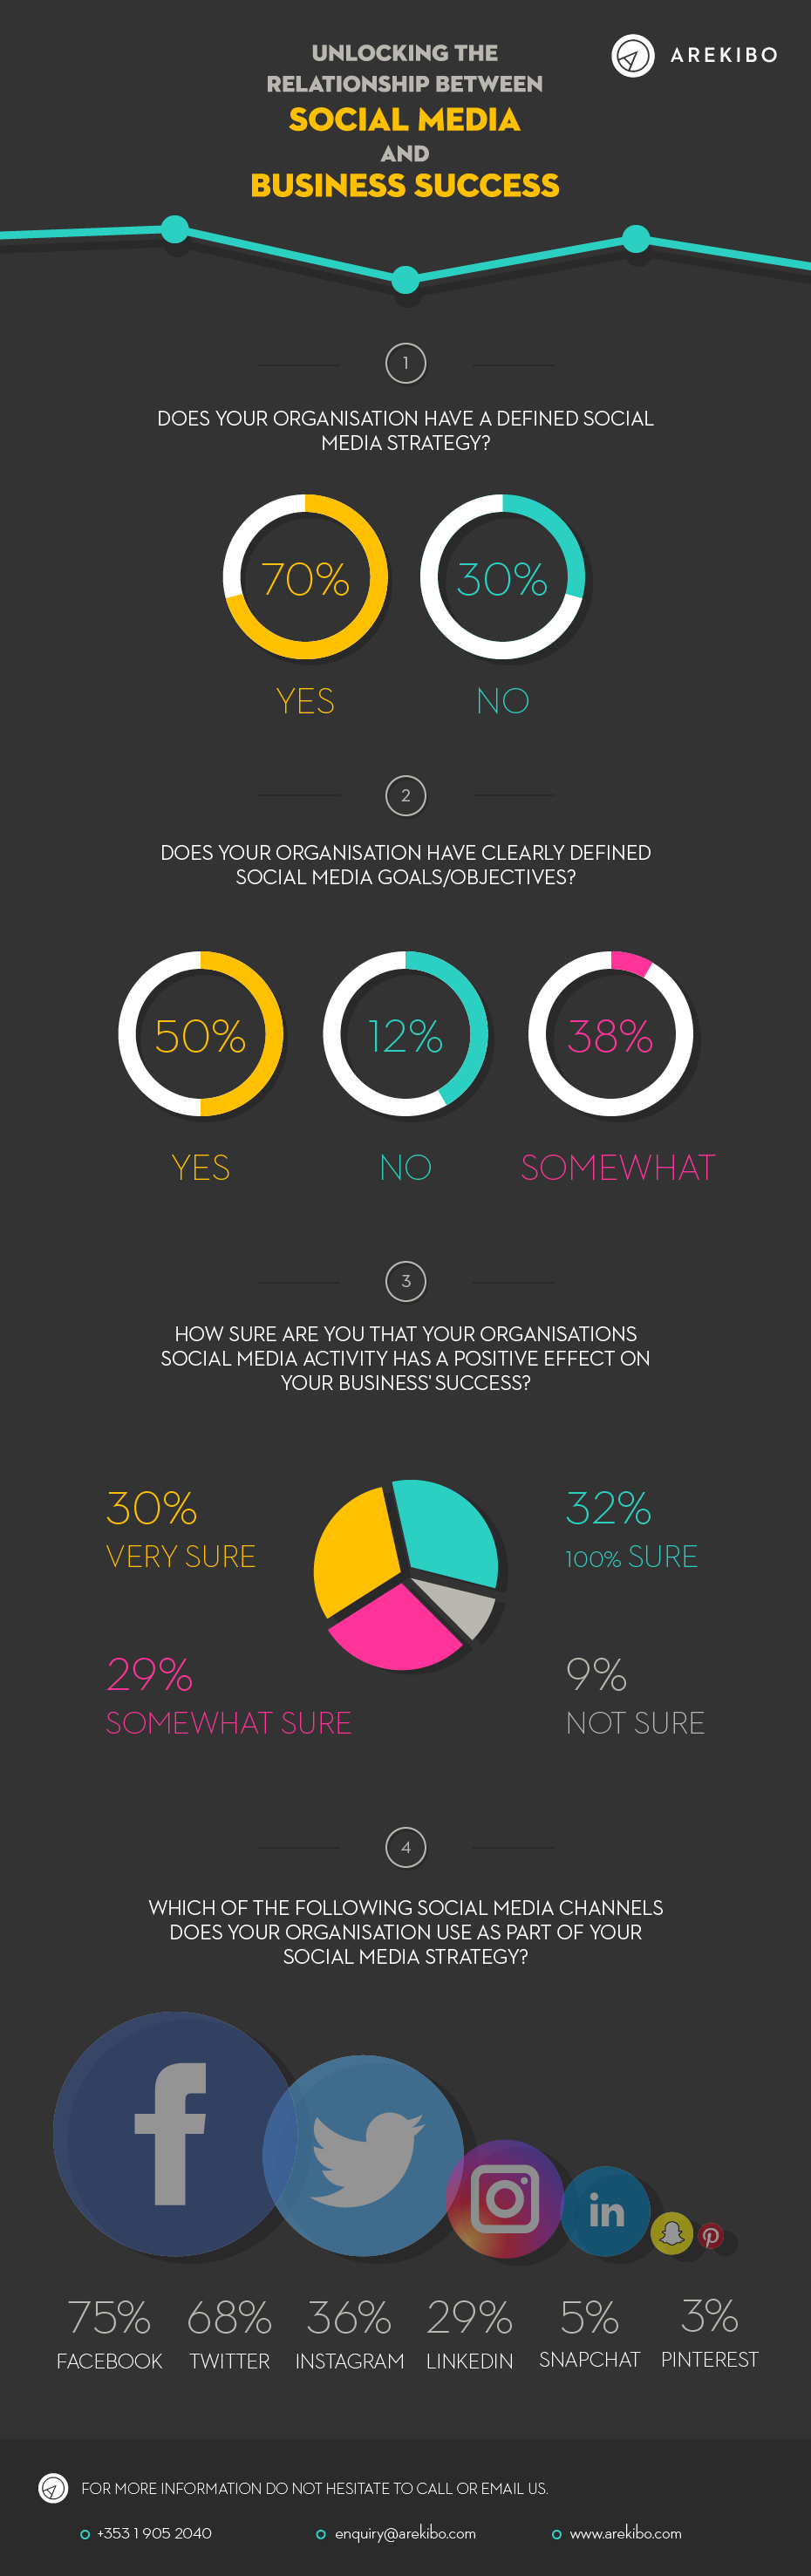 Infographic Social Media and Business Success